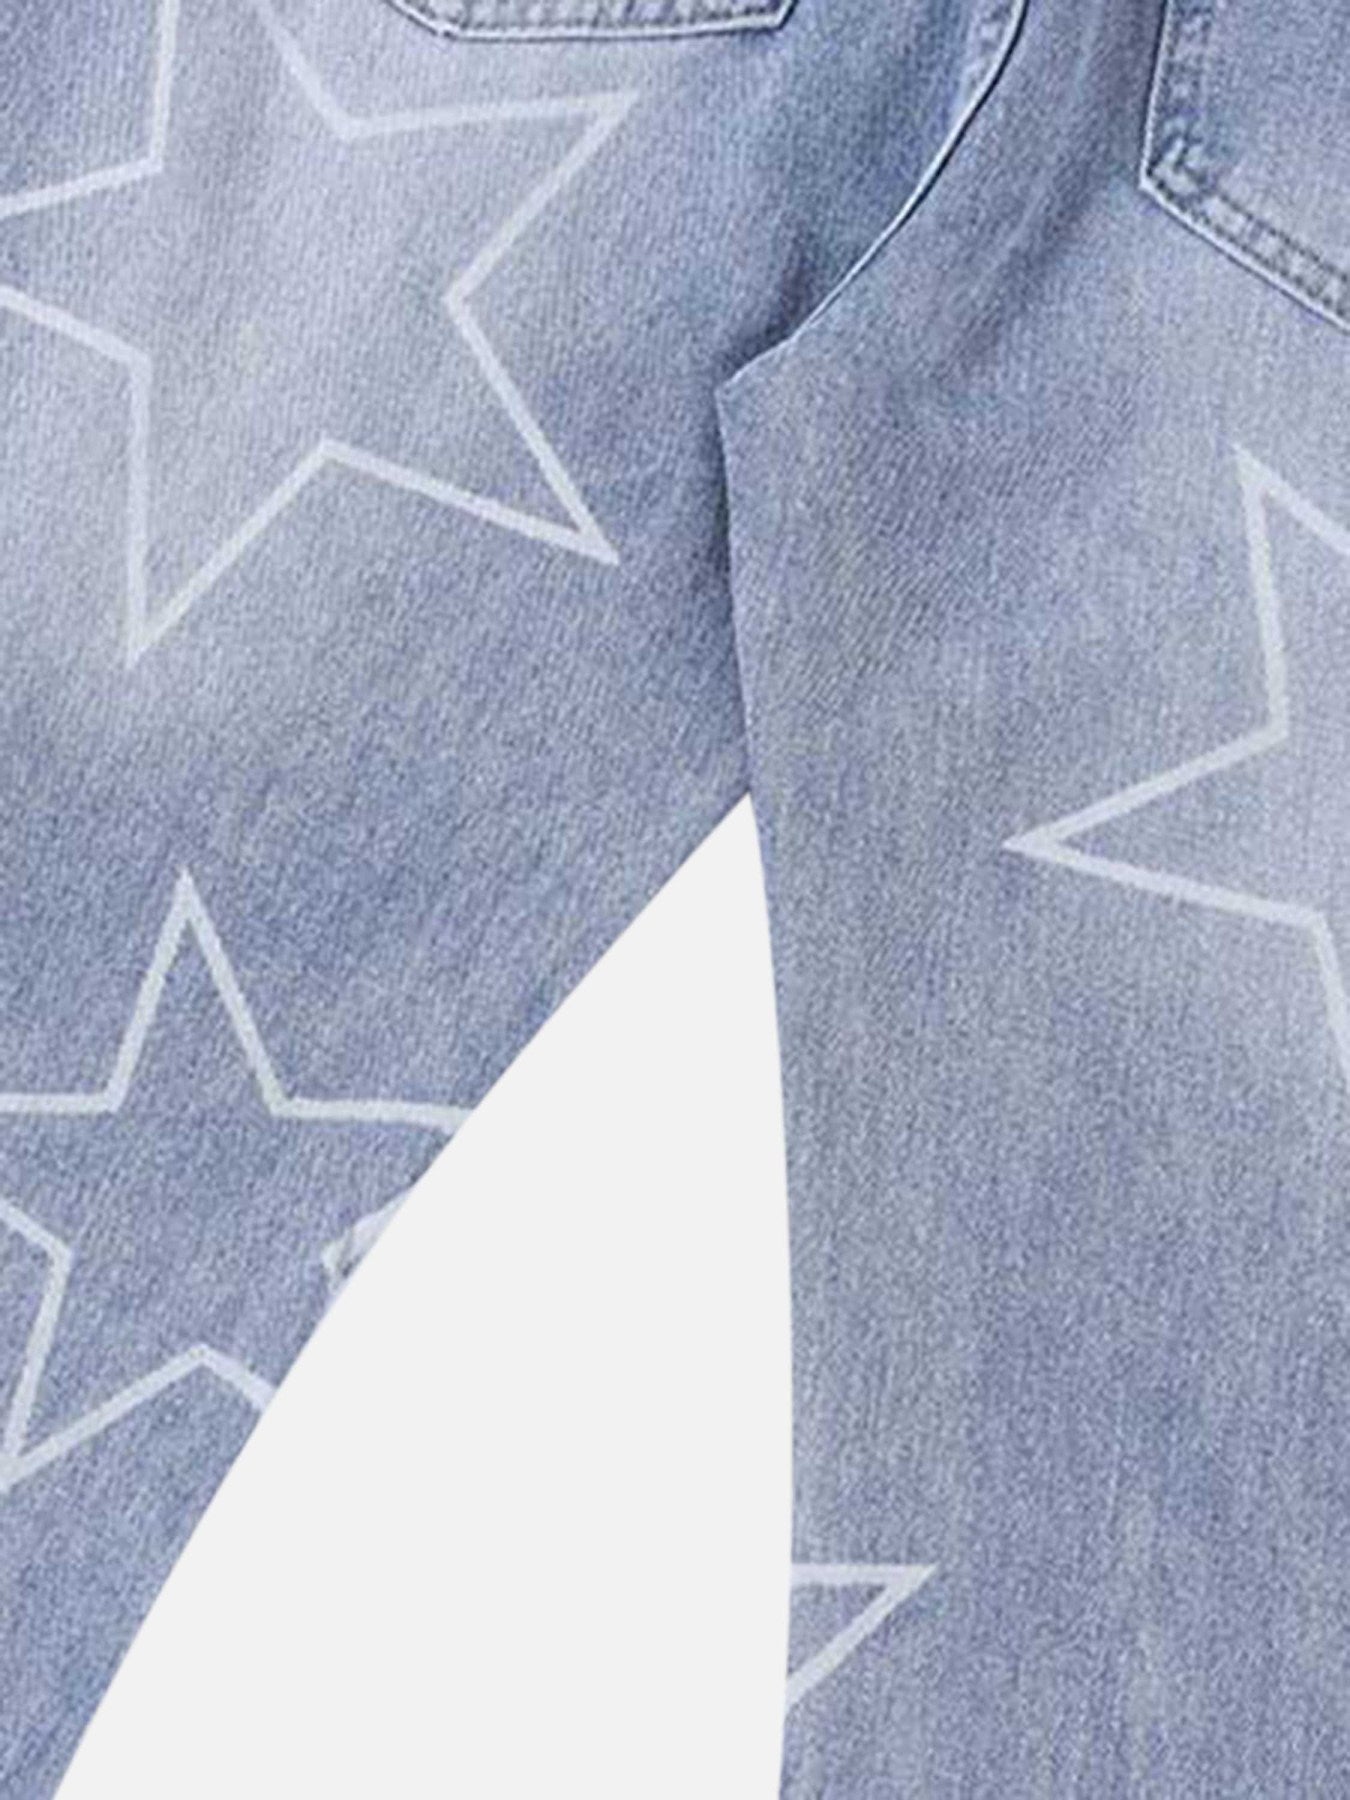 The Supermade Star Print Ripped Jeans